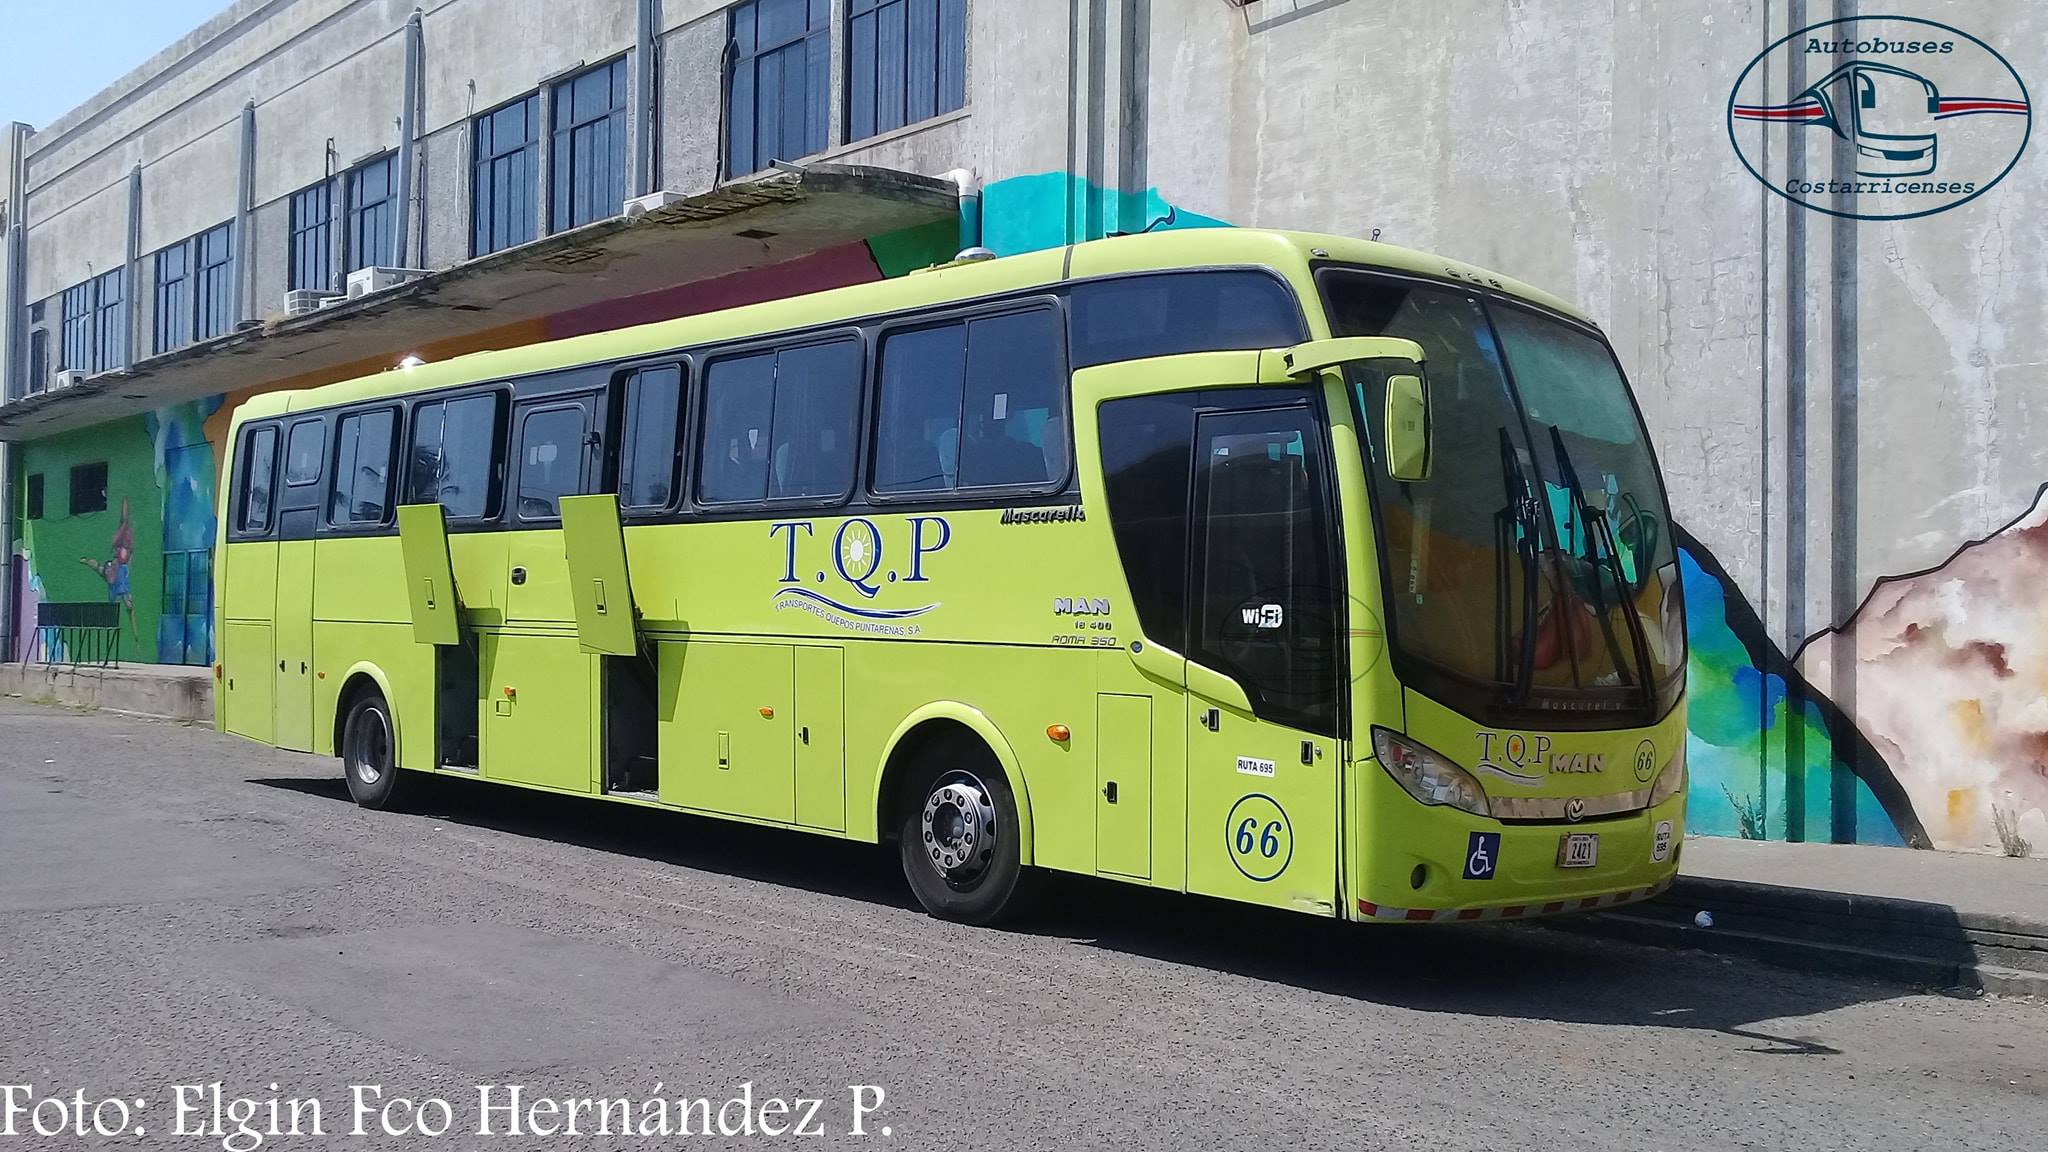 How To Get From La Fortuna to Jaco Beach - All Possible Ways, cheapest way from La Fortuna to Jaco, La Fortuna to Jaco Beach, La Fortuna Costa Rica to Jaco, La Fortuna to San Ramon, San Ramon to Puntarenas, Puntarenas to Jaco